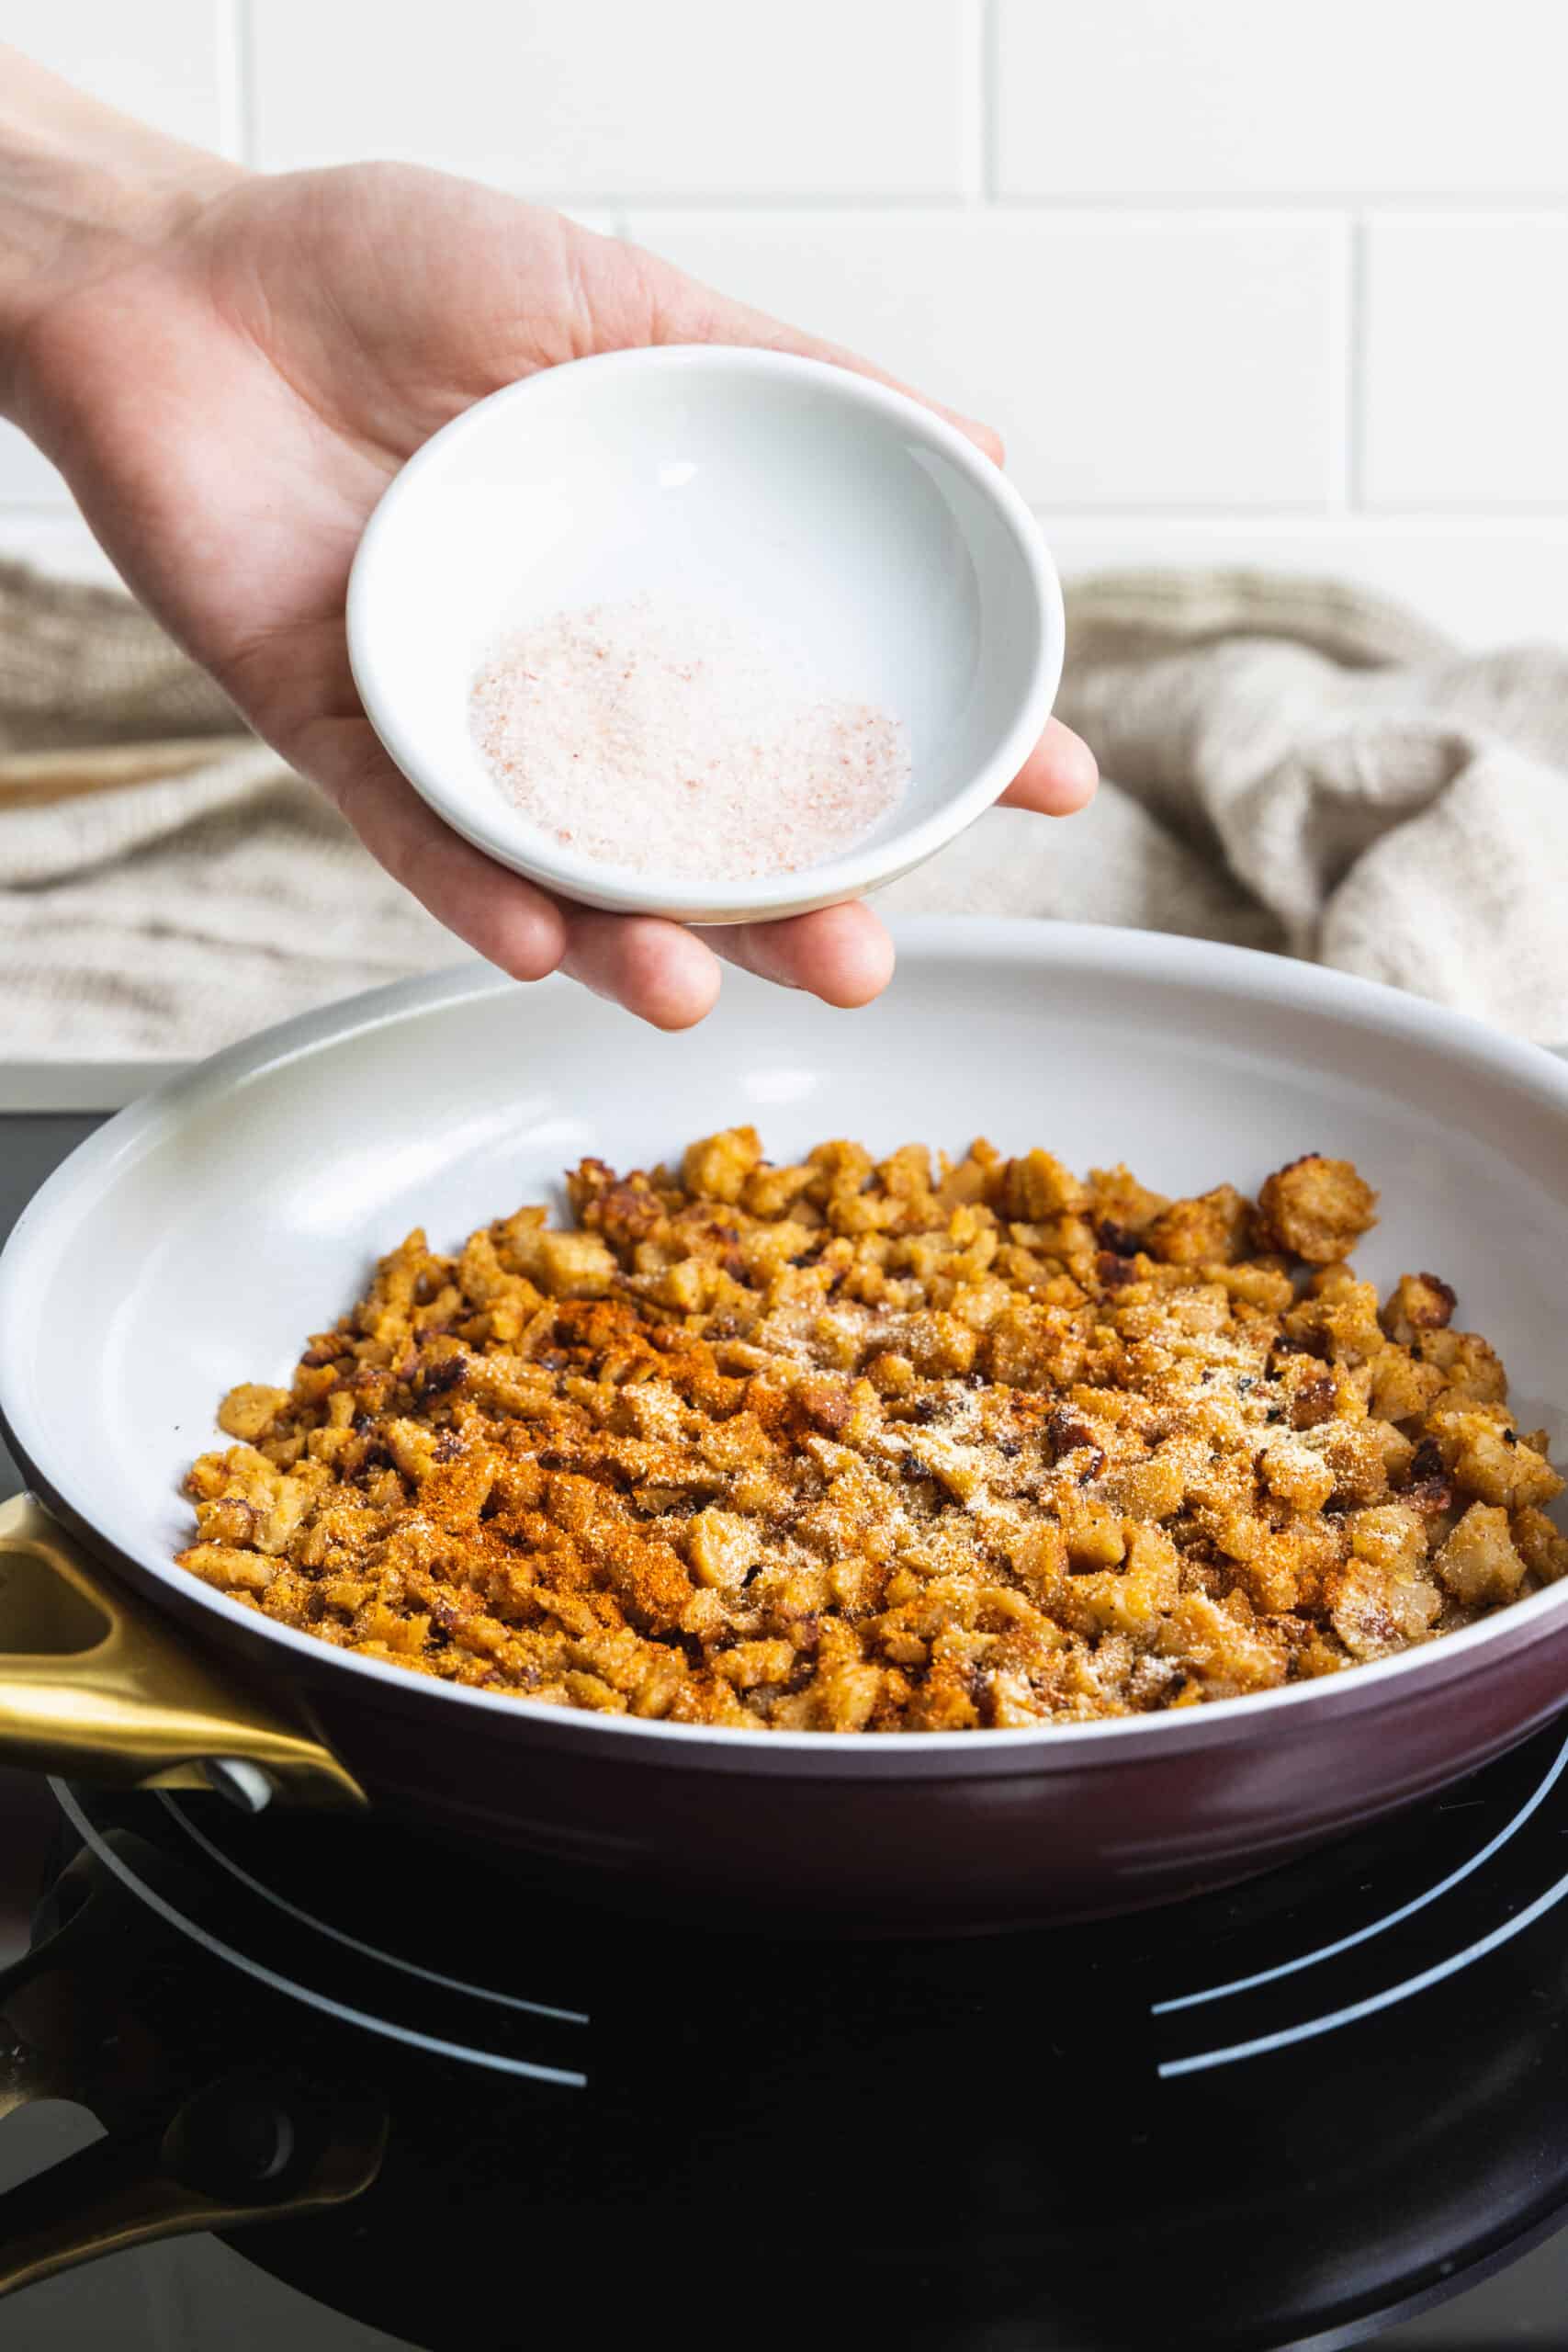 Seasoning the Meatless Crumbles with Salt